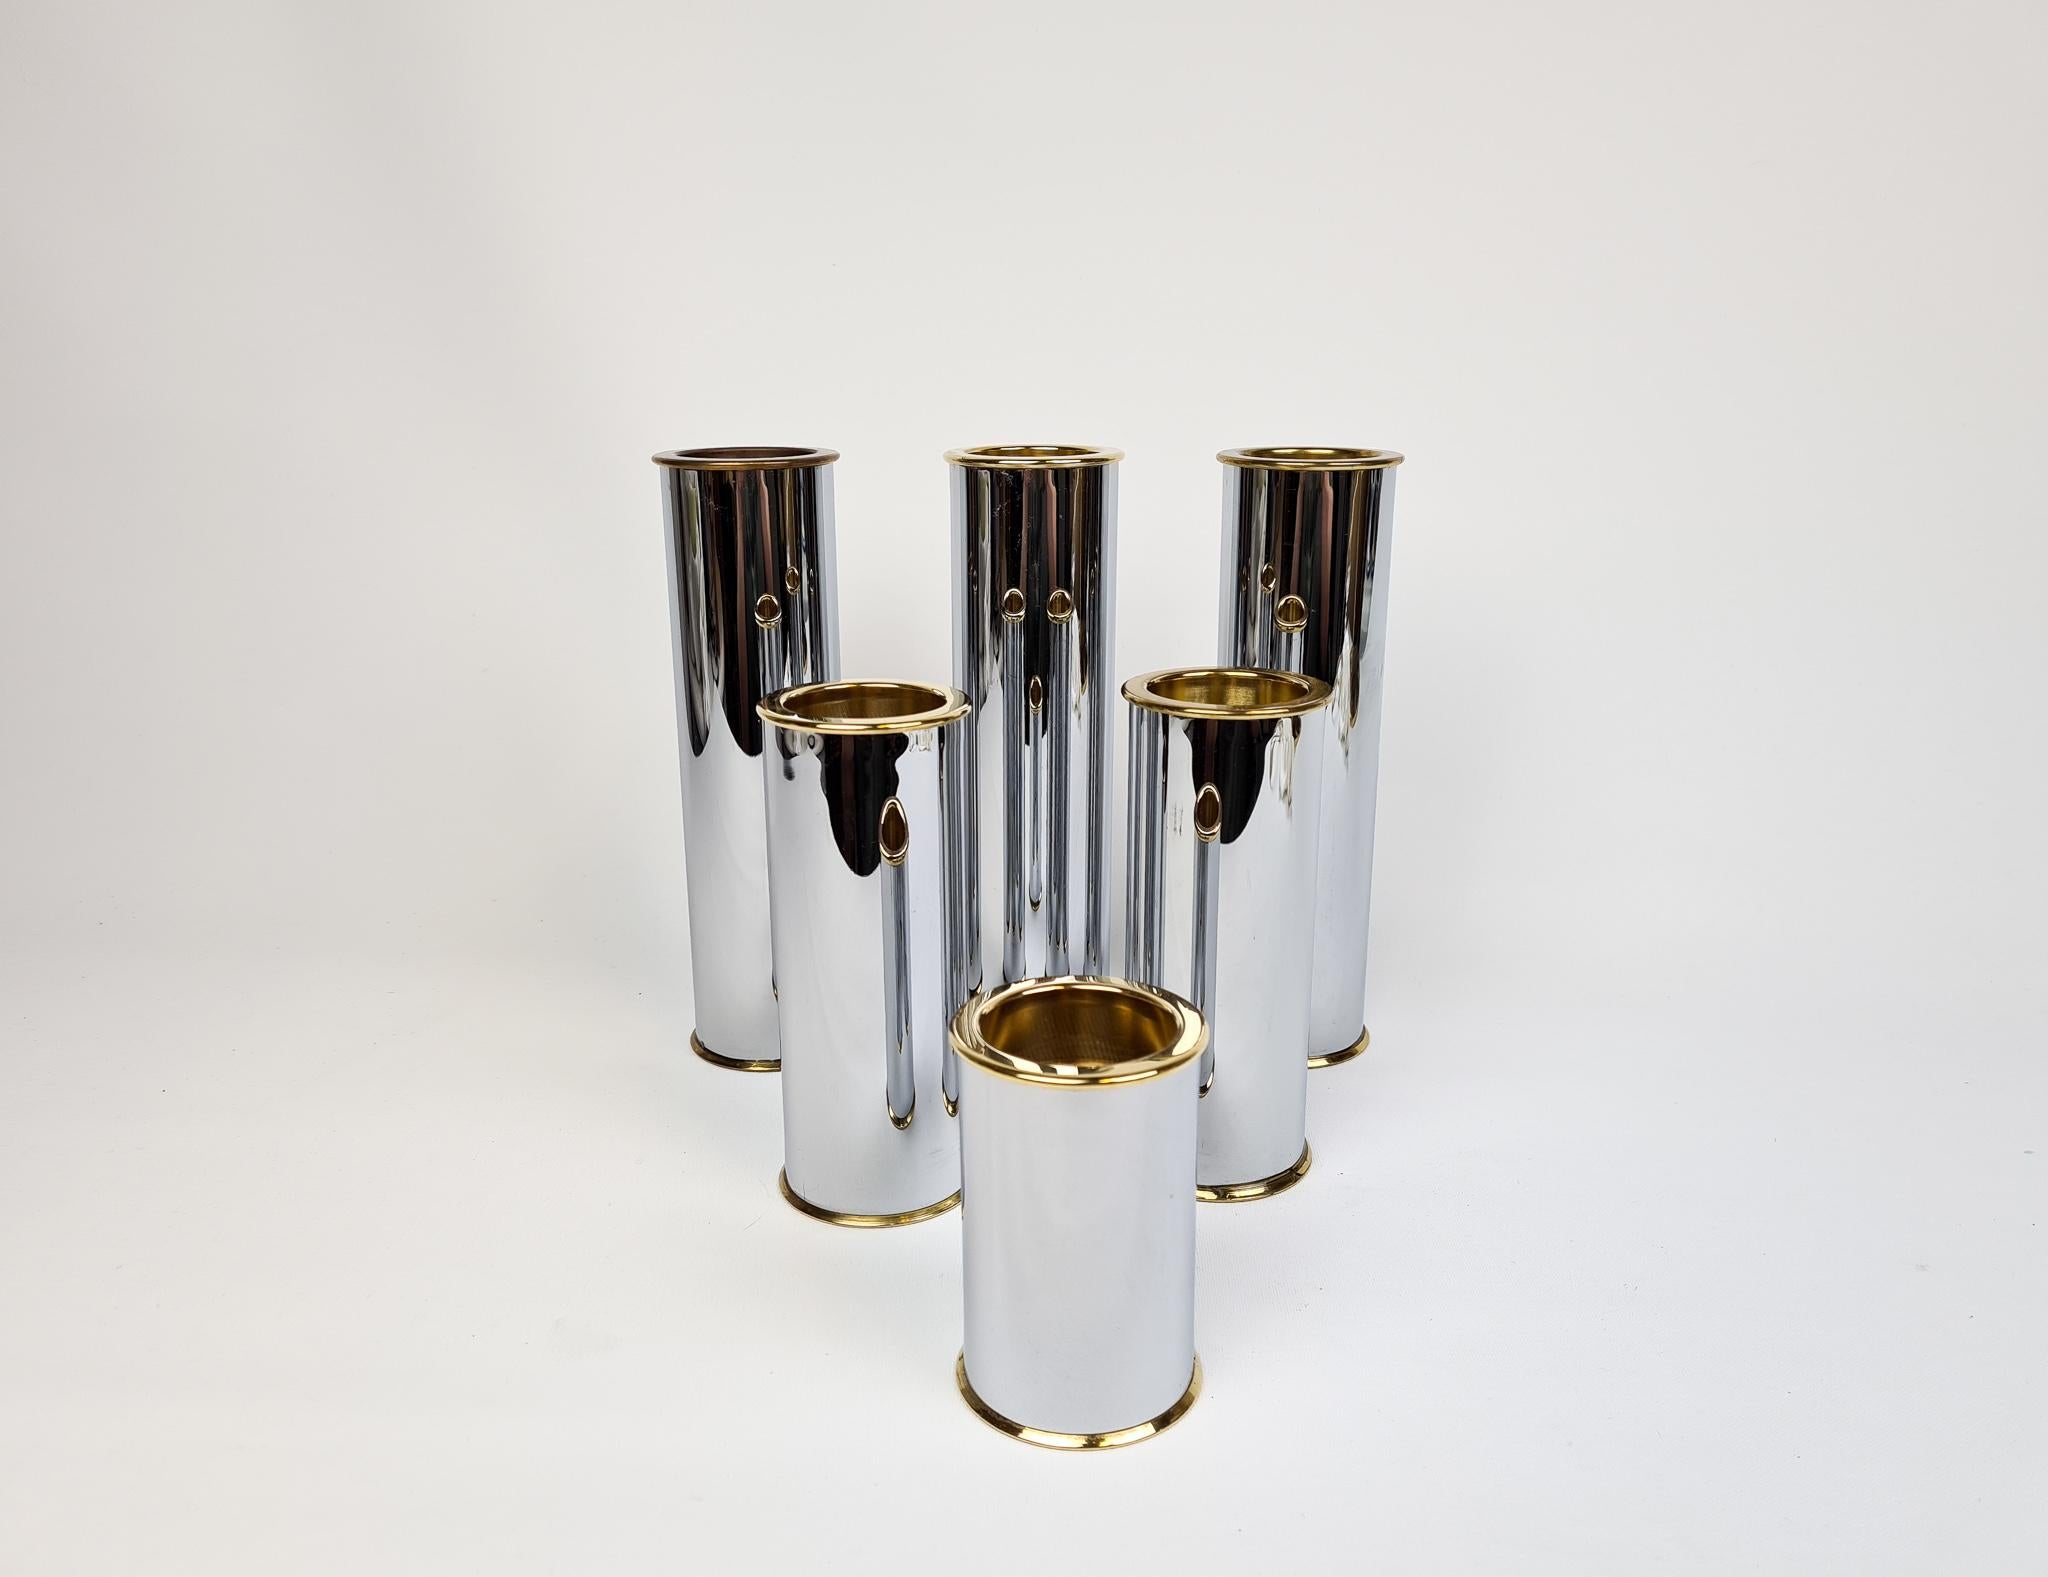 Late 20th Century Swedish Modern Candelholders in Brass and Steel, Englesson, Sweden, 1970s For Sale